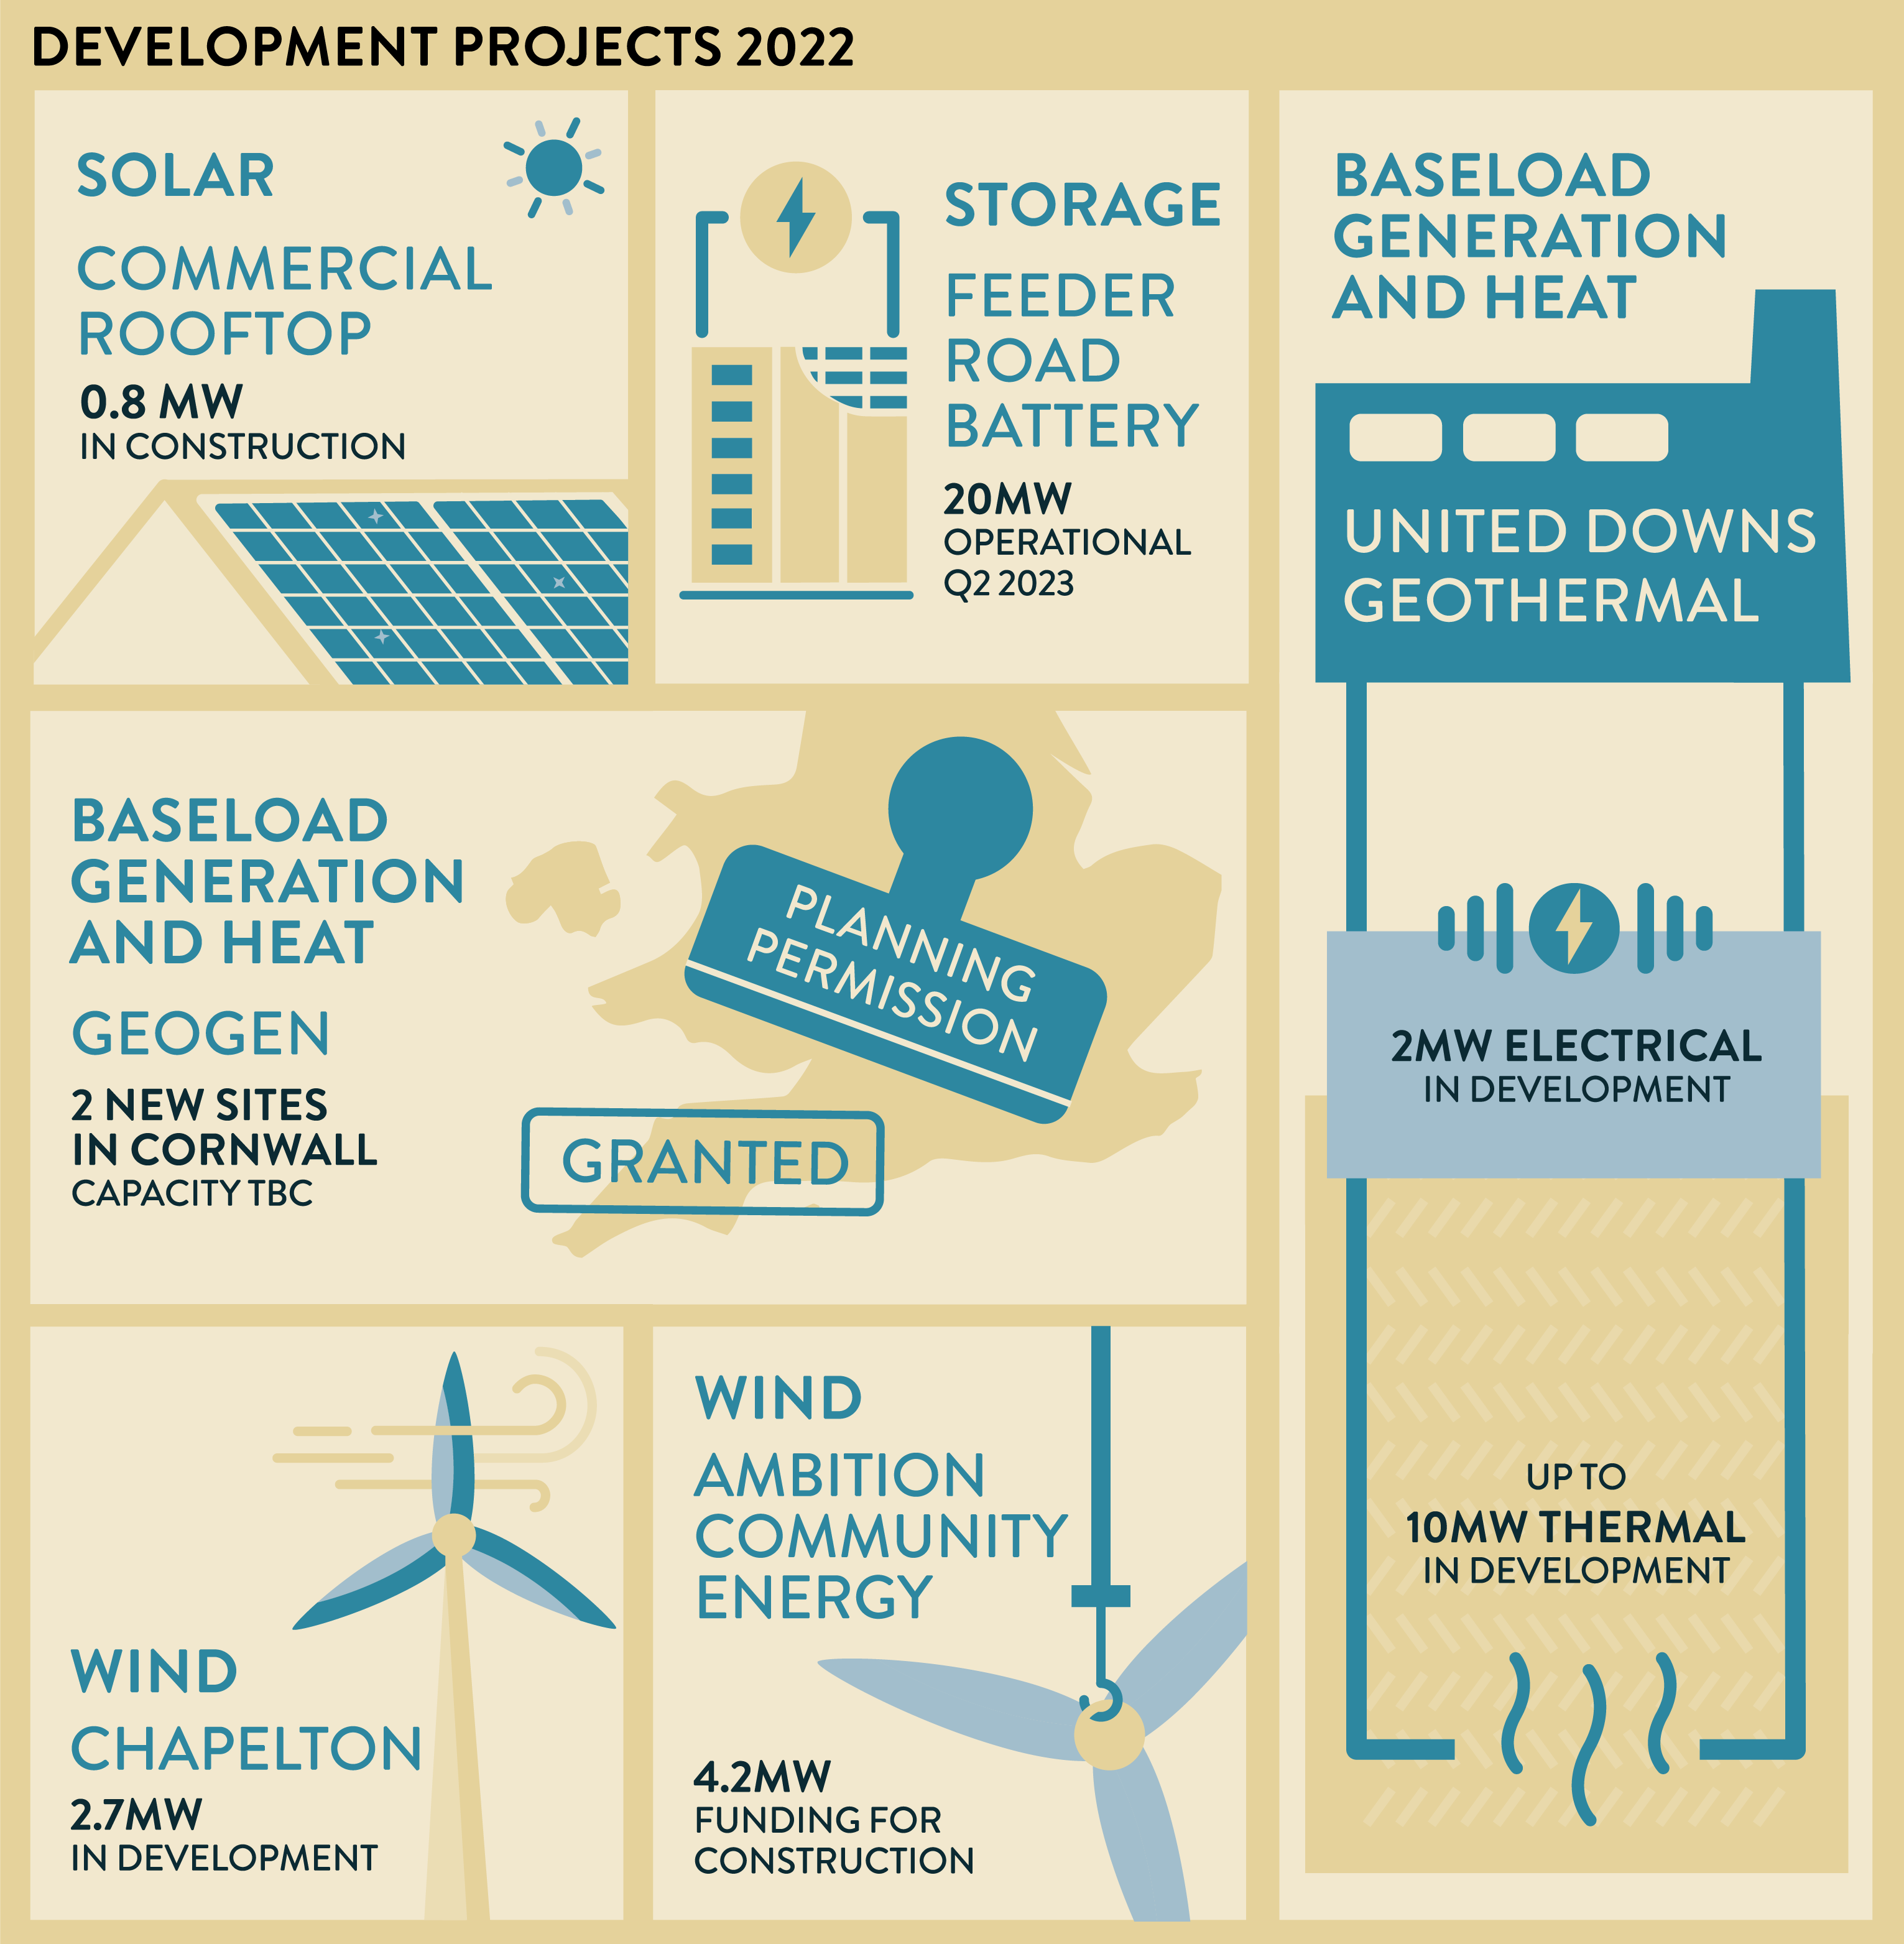 Development projects 2022 information: Solar, commercial rooftop, 0.8MW in construction. Storage, feeder road battery, 20MW, operational Q2 2023. Baseload generation and heat, Geogen, planning permission granted for 2 new sites in Cornwall, capactiy tbc. Wind, Chapelton, 2.7MW, in development. Wind, ambition community energy, 4.2MW, funding for construction. baseload generation and heat, United Downs Geothermal, 2MW electrical in development, up to 10MW thermal in developmet.